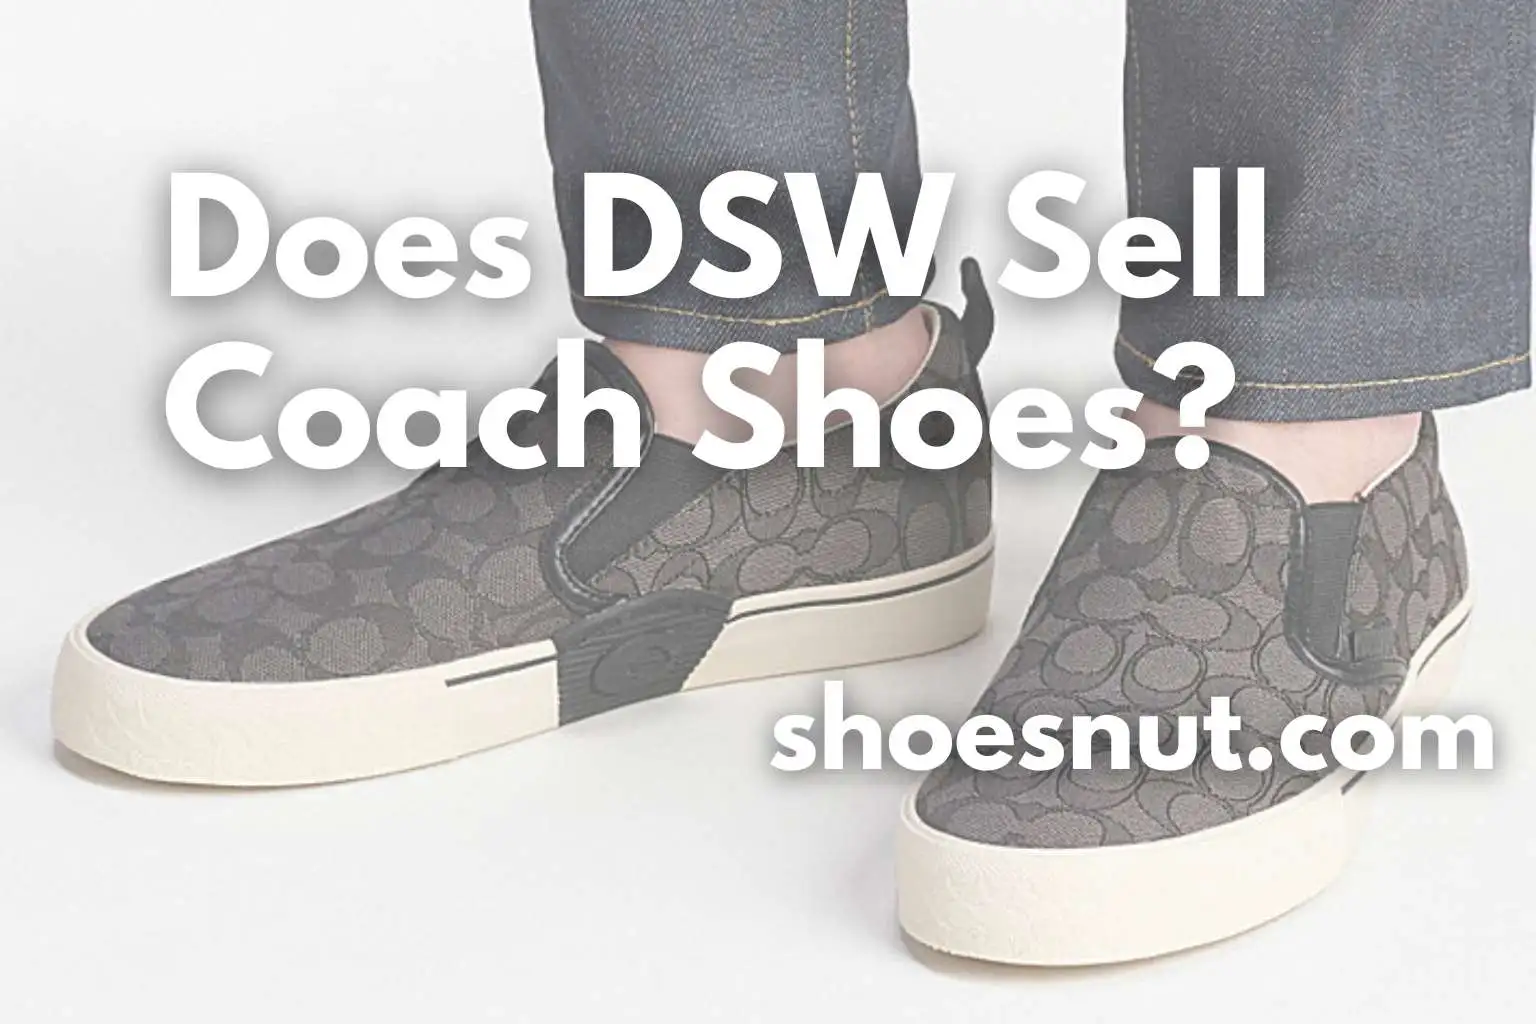 Does DSW Sell Coach Shoes?